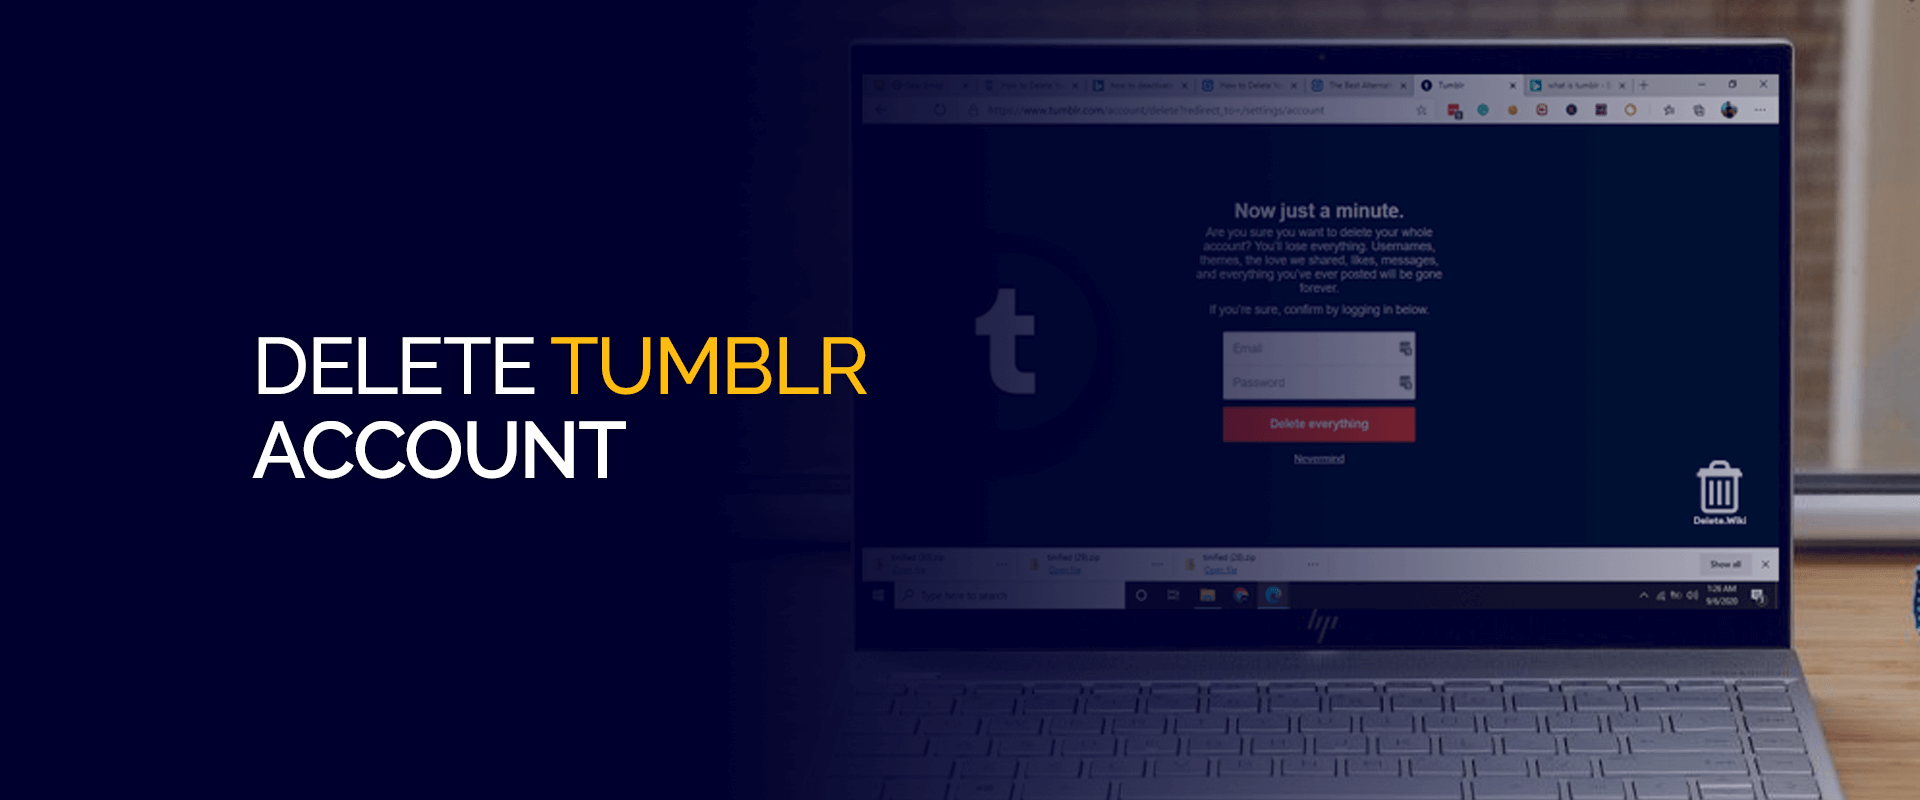 How to delete your Tumblr account or blog - Android Authority